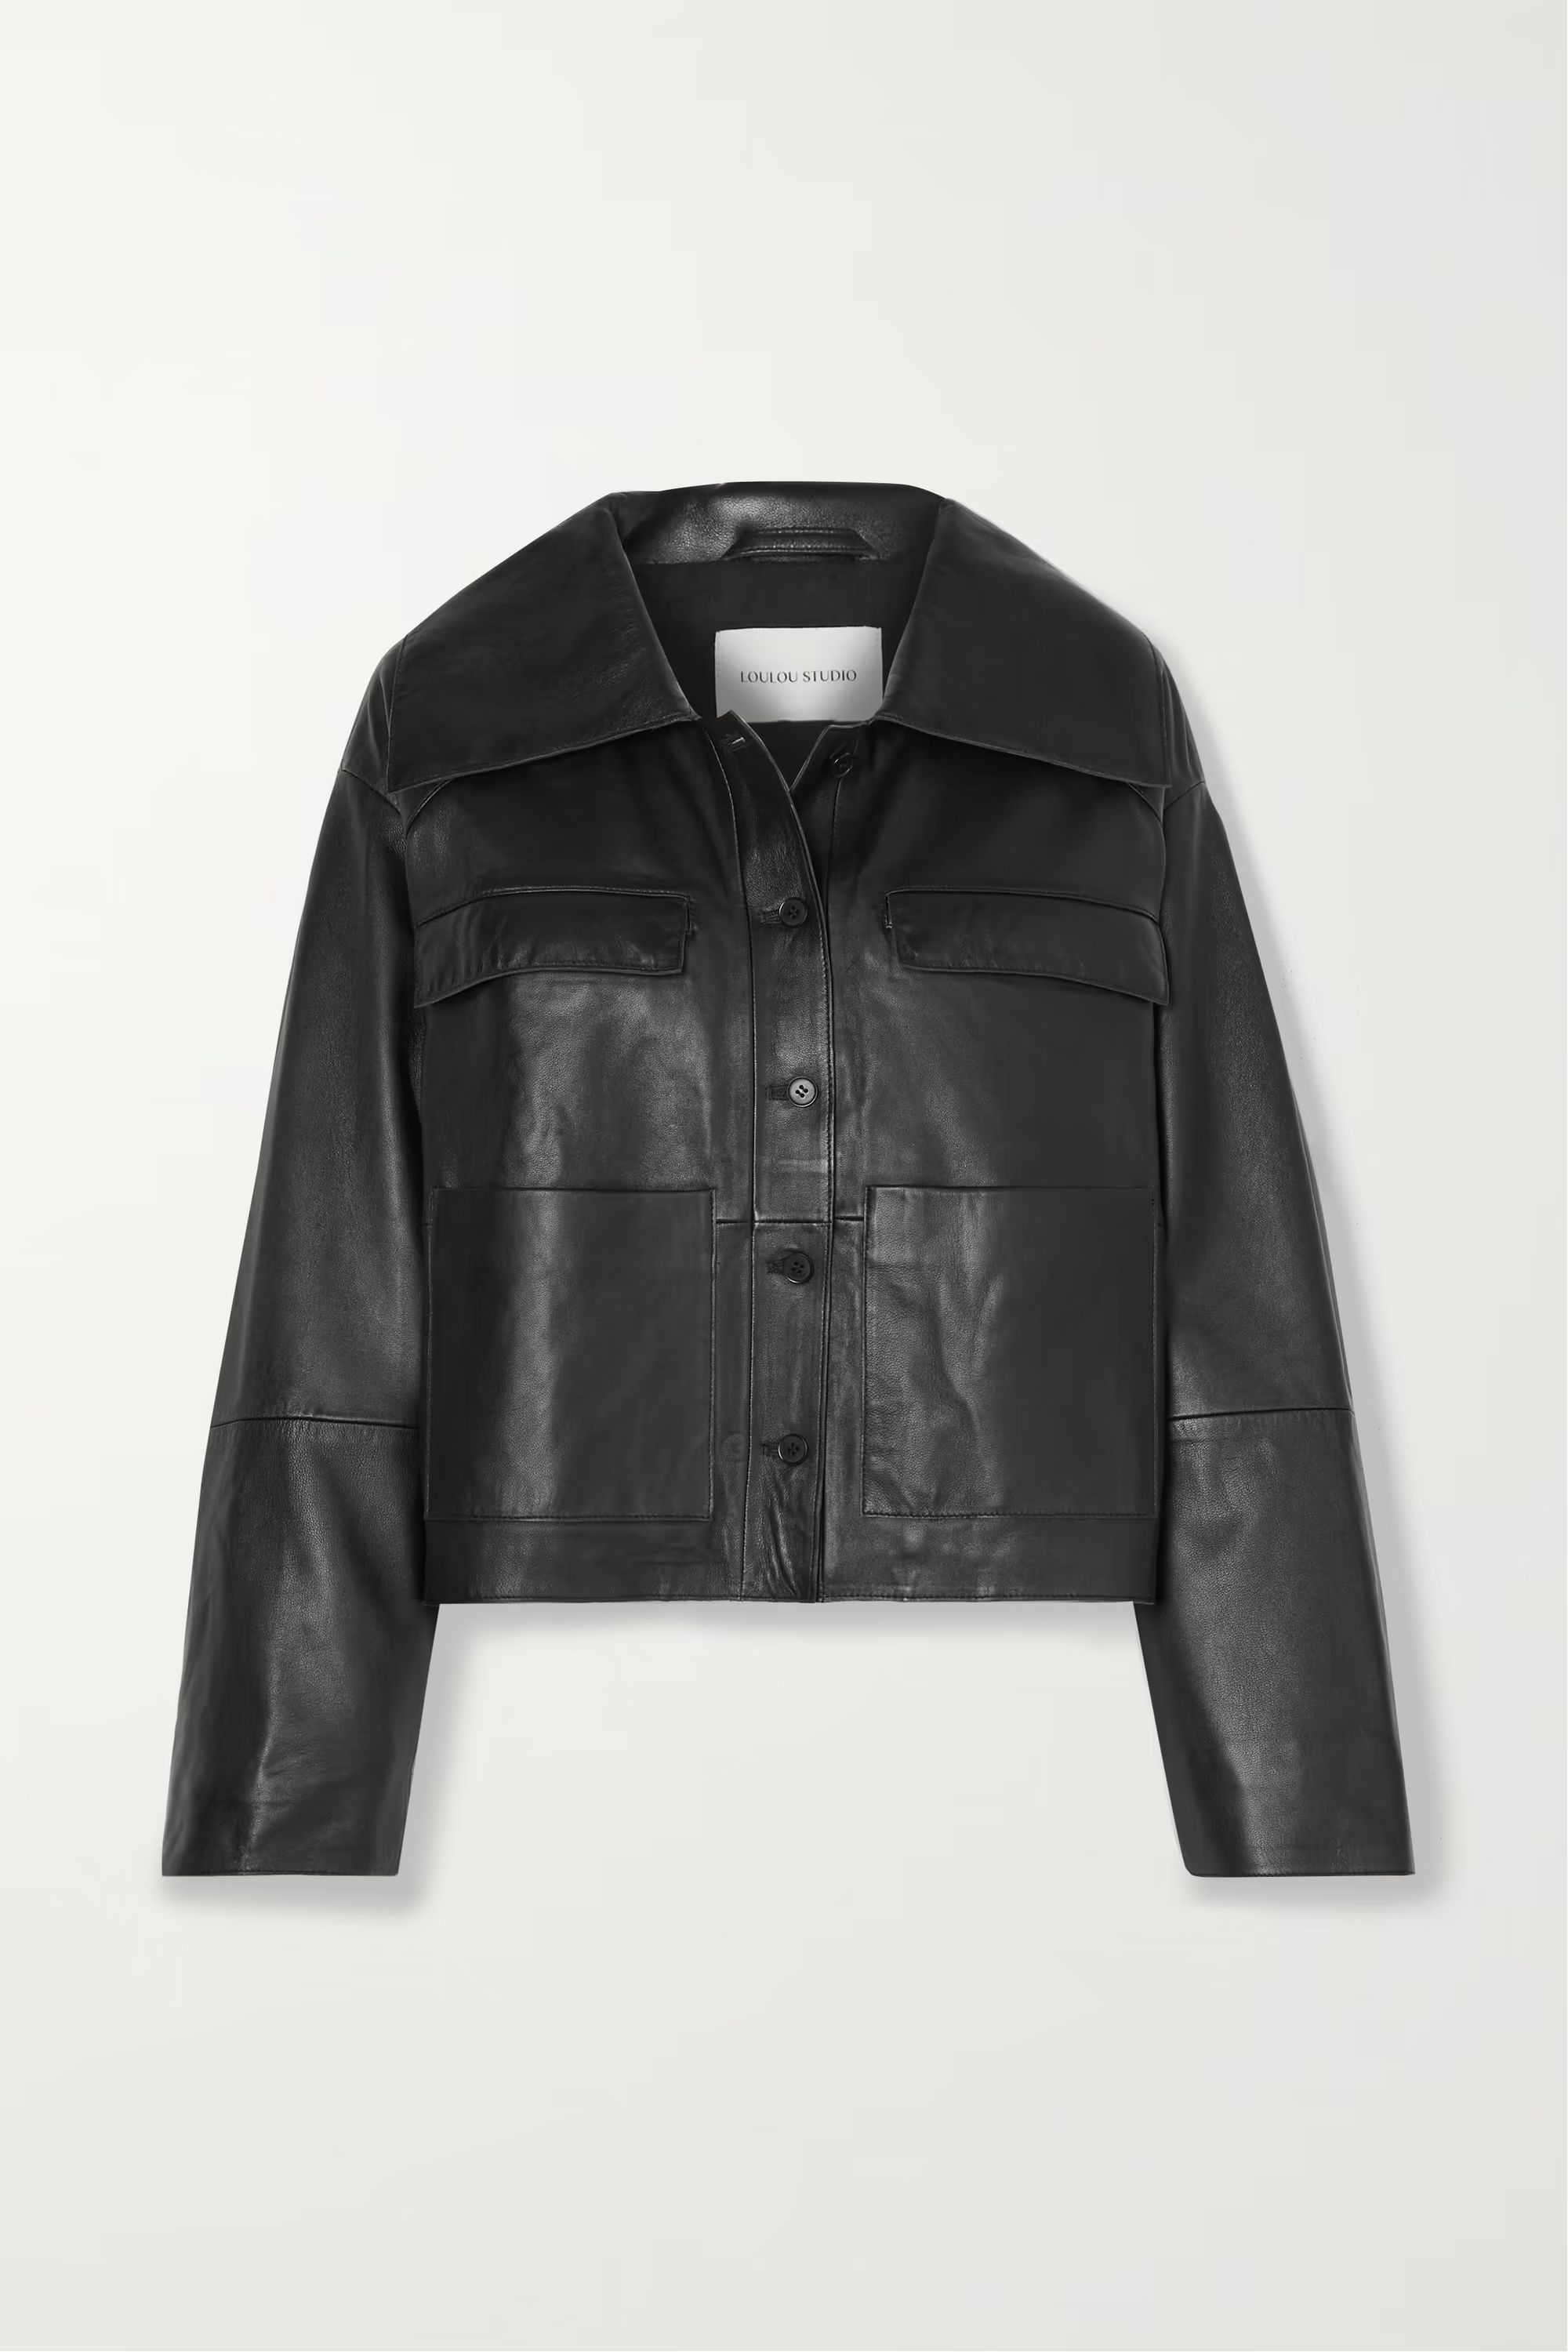 LOULOU STUDIOSulat cropped leather jacket | NET-A-PORTER (US)